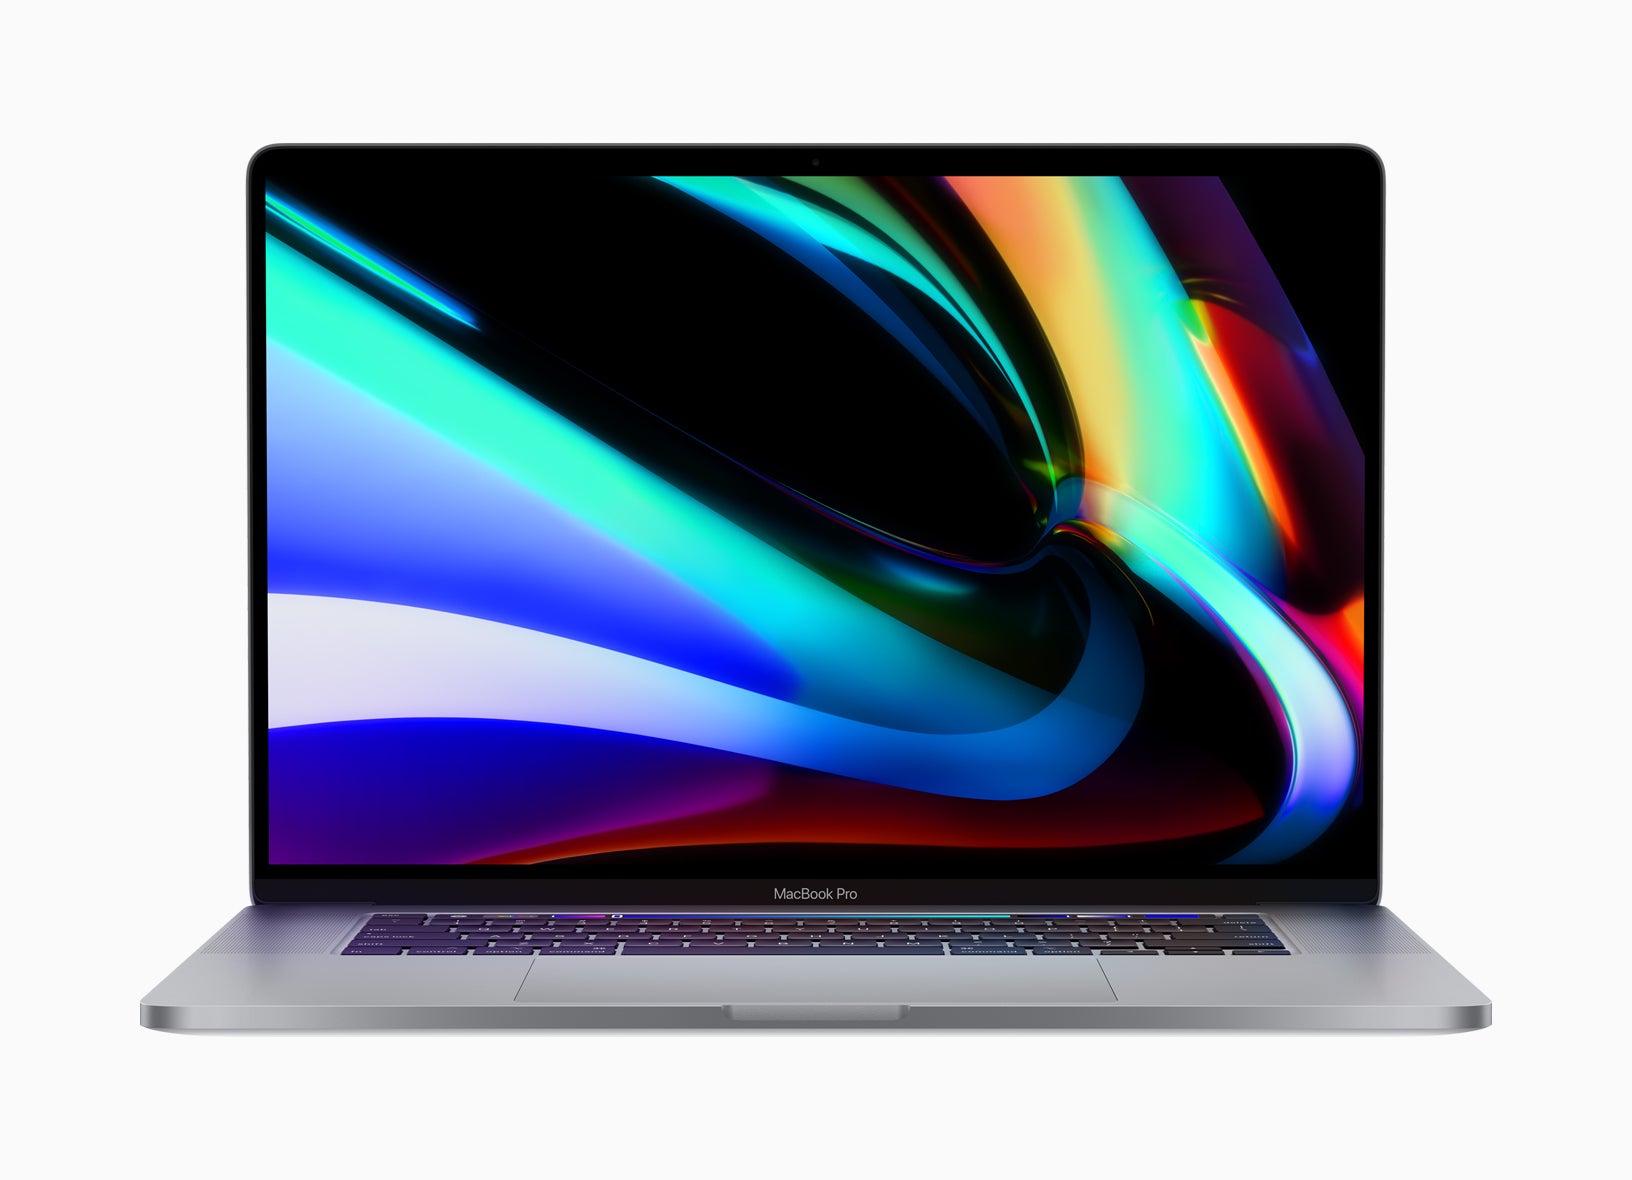 Refurbished 13-inch M1 MacBook Pro now available from Apple | Macworld